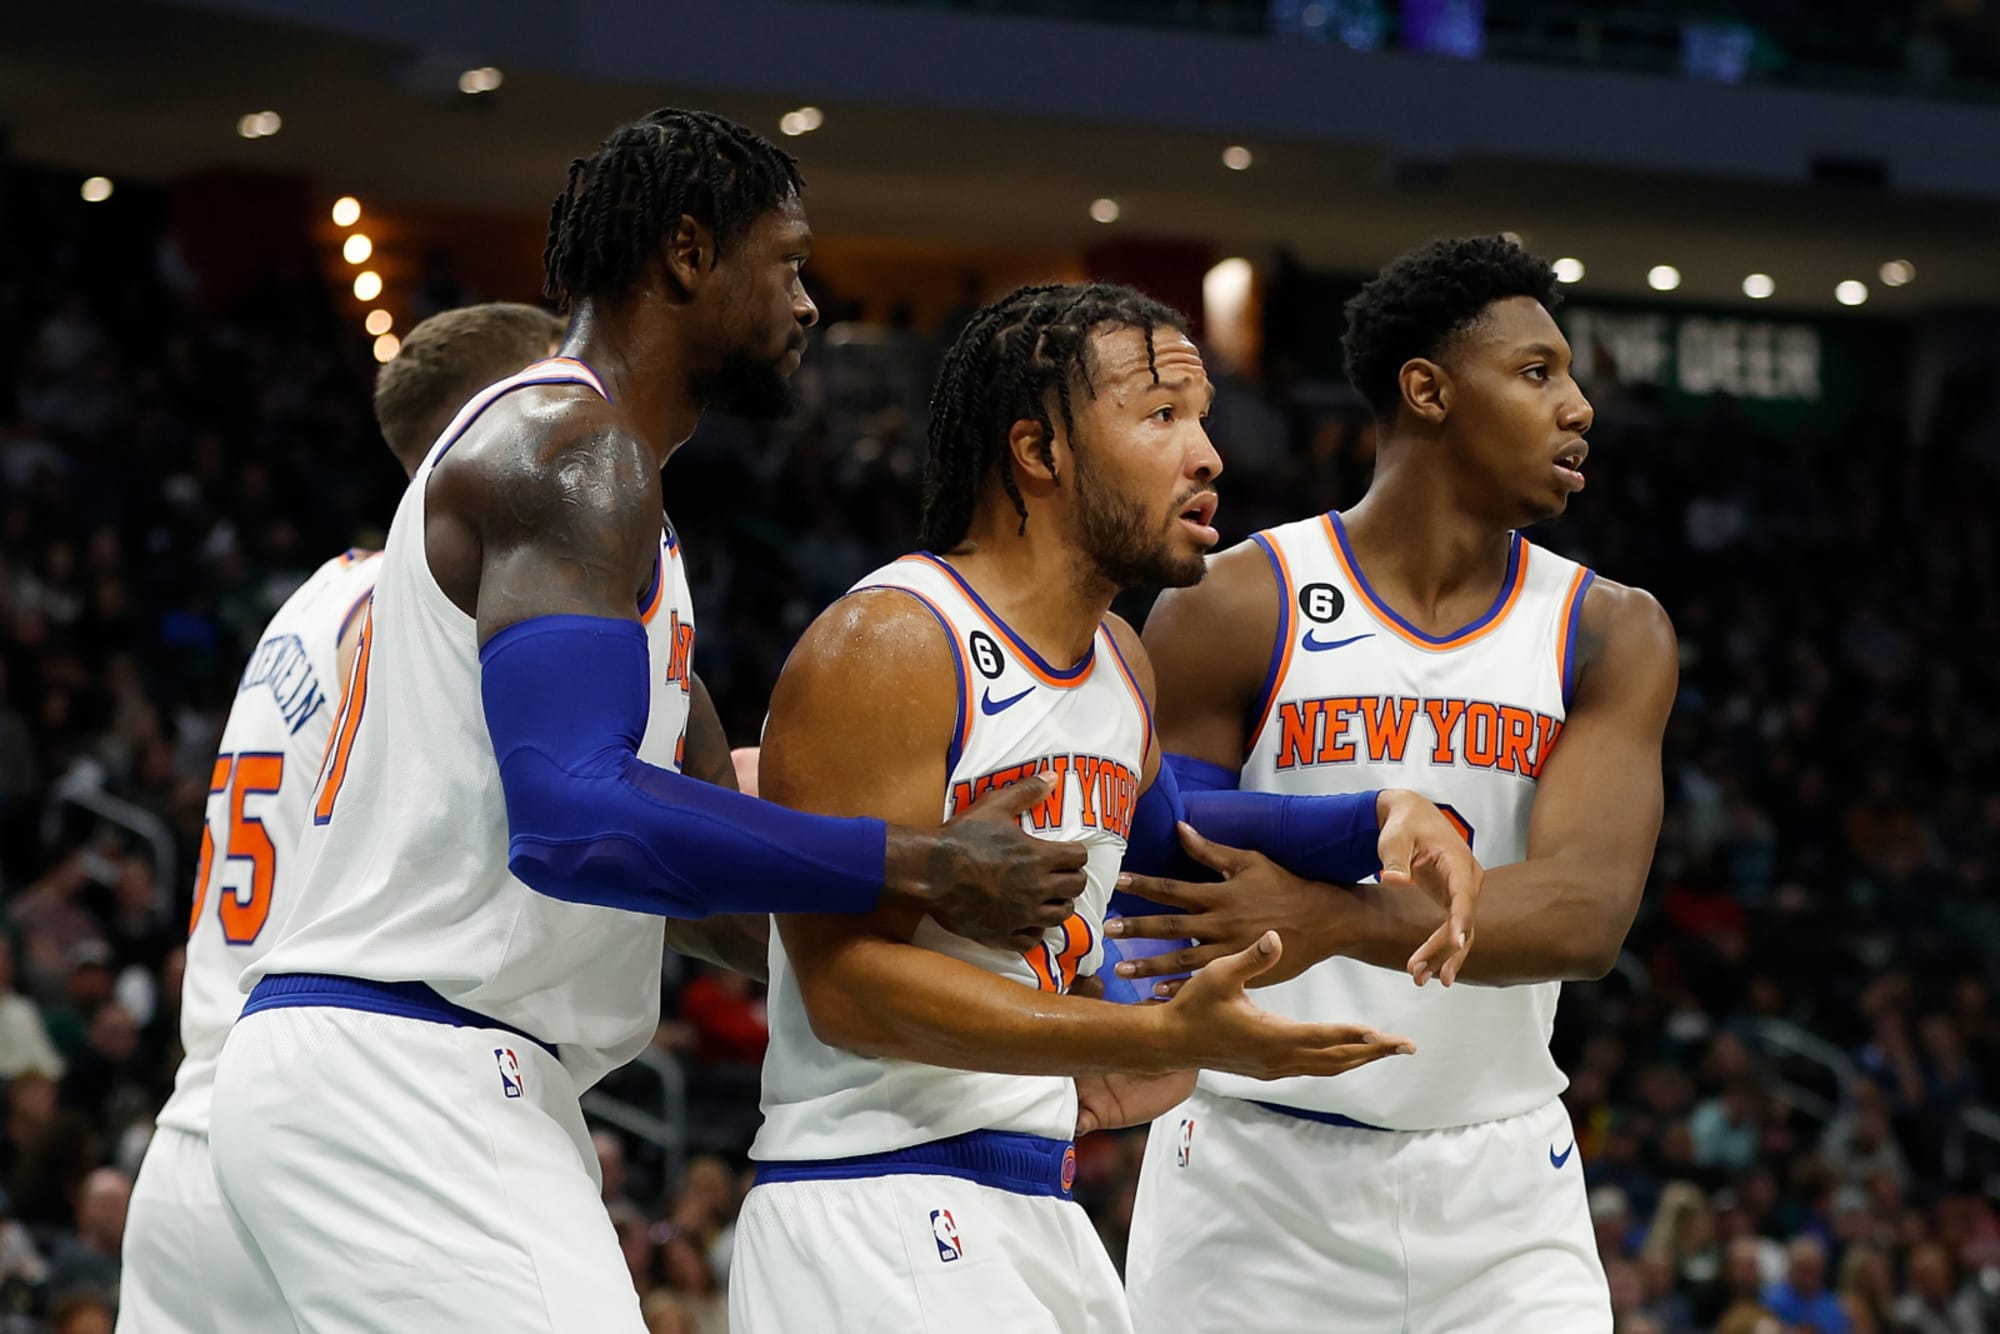 KNICKS ARE ADVANCING TO THE SECOND ROUND FOR THE SECOND TIME IN THE LAST 23  YEARS. FACING EITHER MILWAUKEE/MIAMI. - #KnicksFeed #KnicksTape